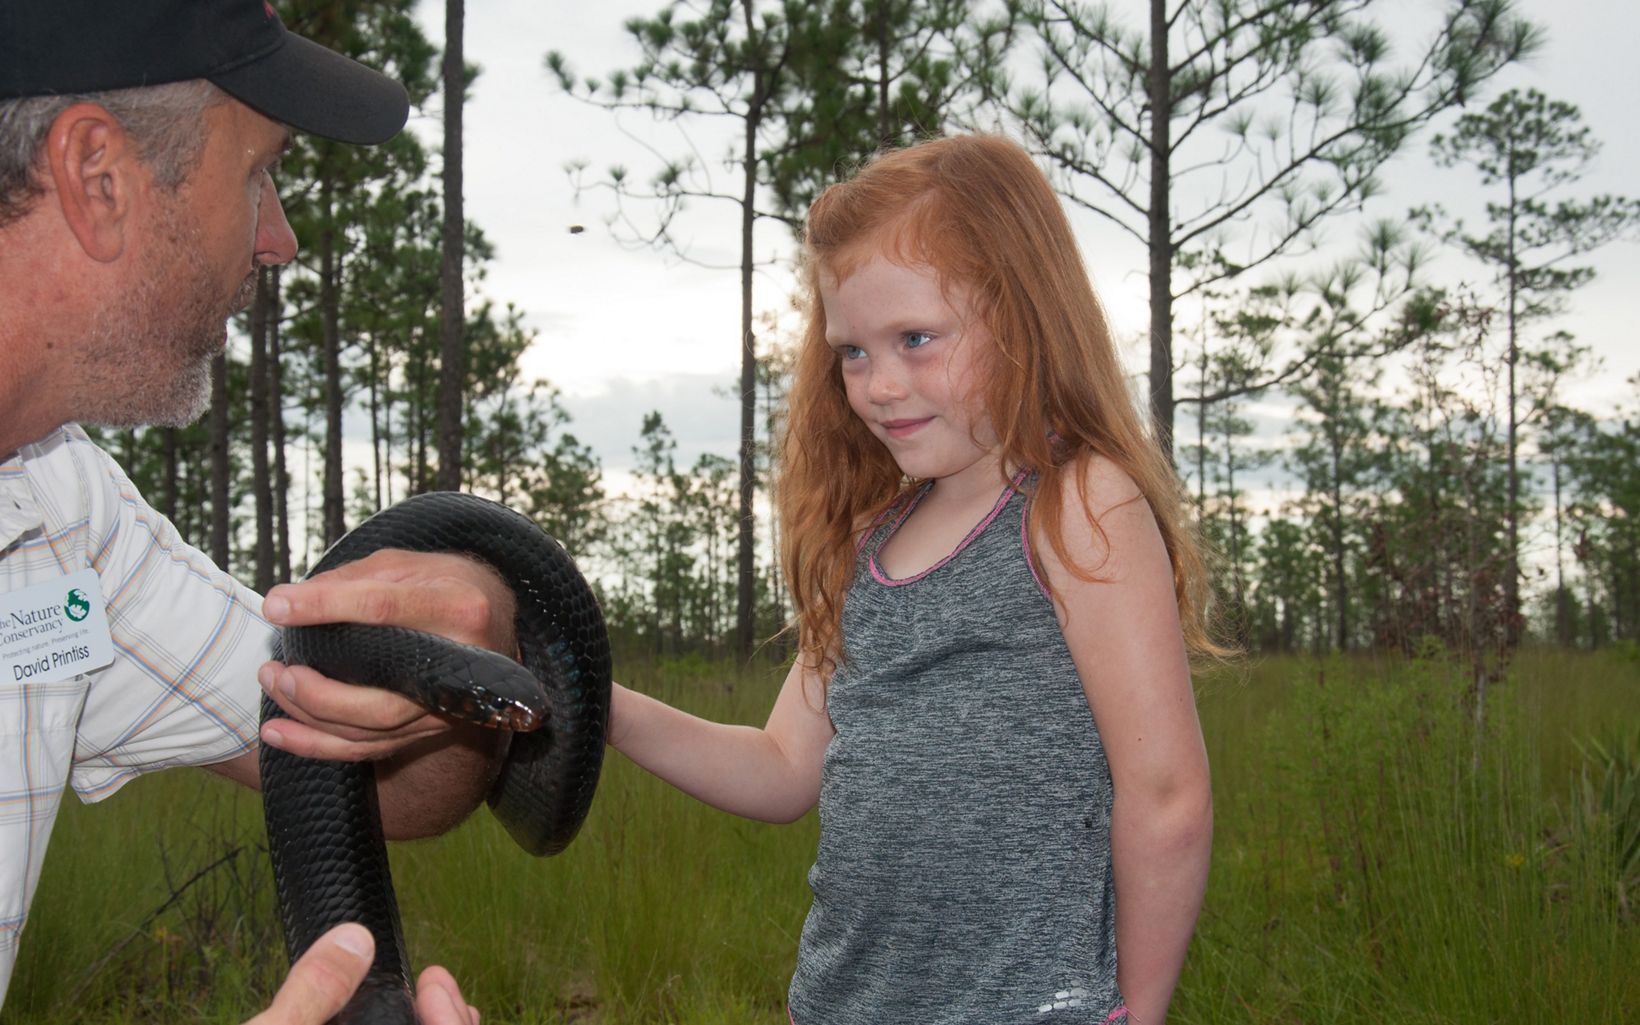 Eastern Indigo Snake Meeting Preserve manager David Printiss introduces nature to the next generation.  © Bill Boothe